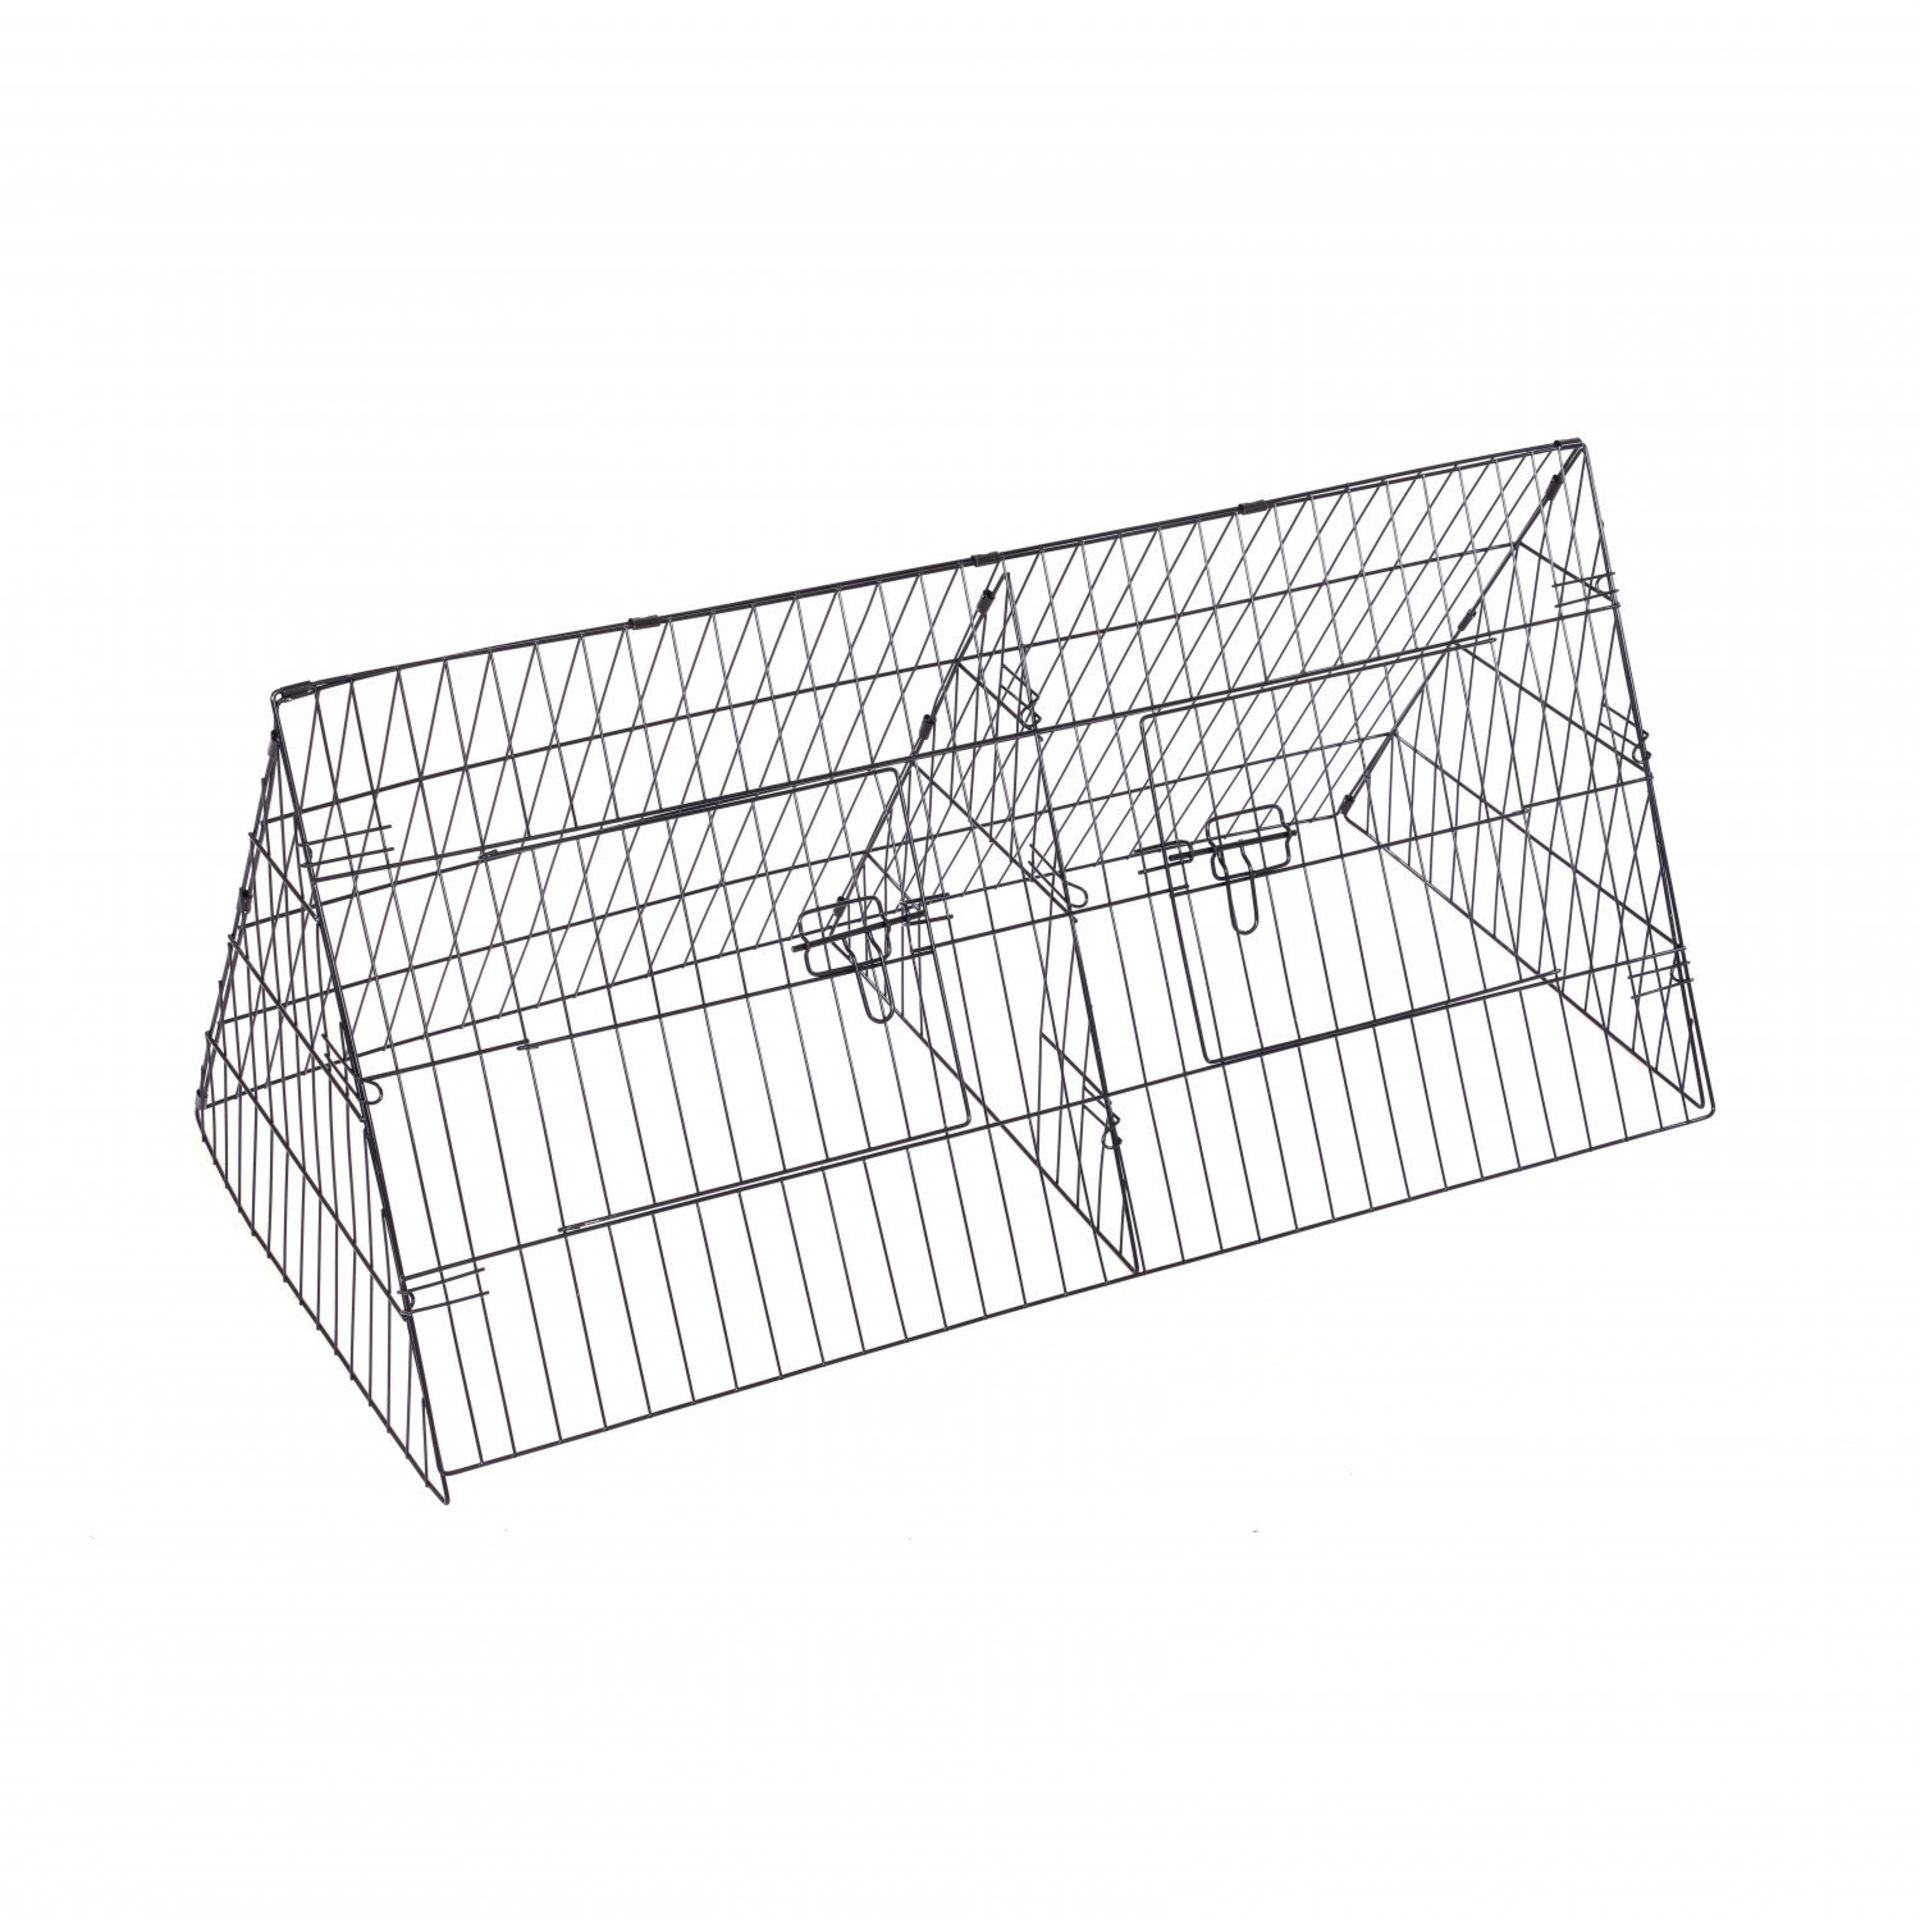 (LF220) 48" Metal Triangle Rabbit Guinea Pig Pet Hutch Run Cage Playpen The triangle hutch... - Image 2 of 2